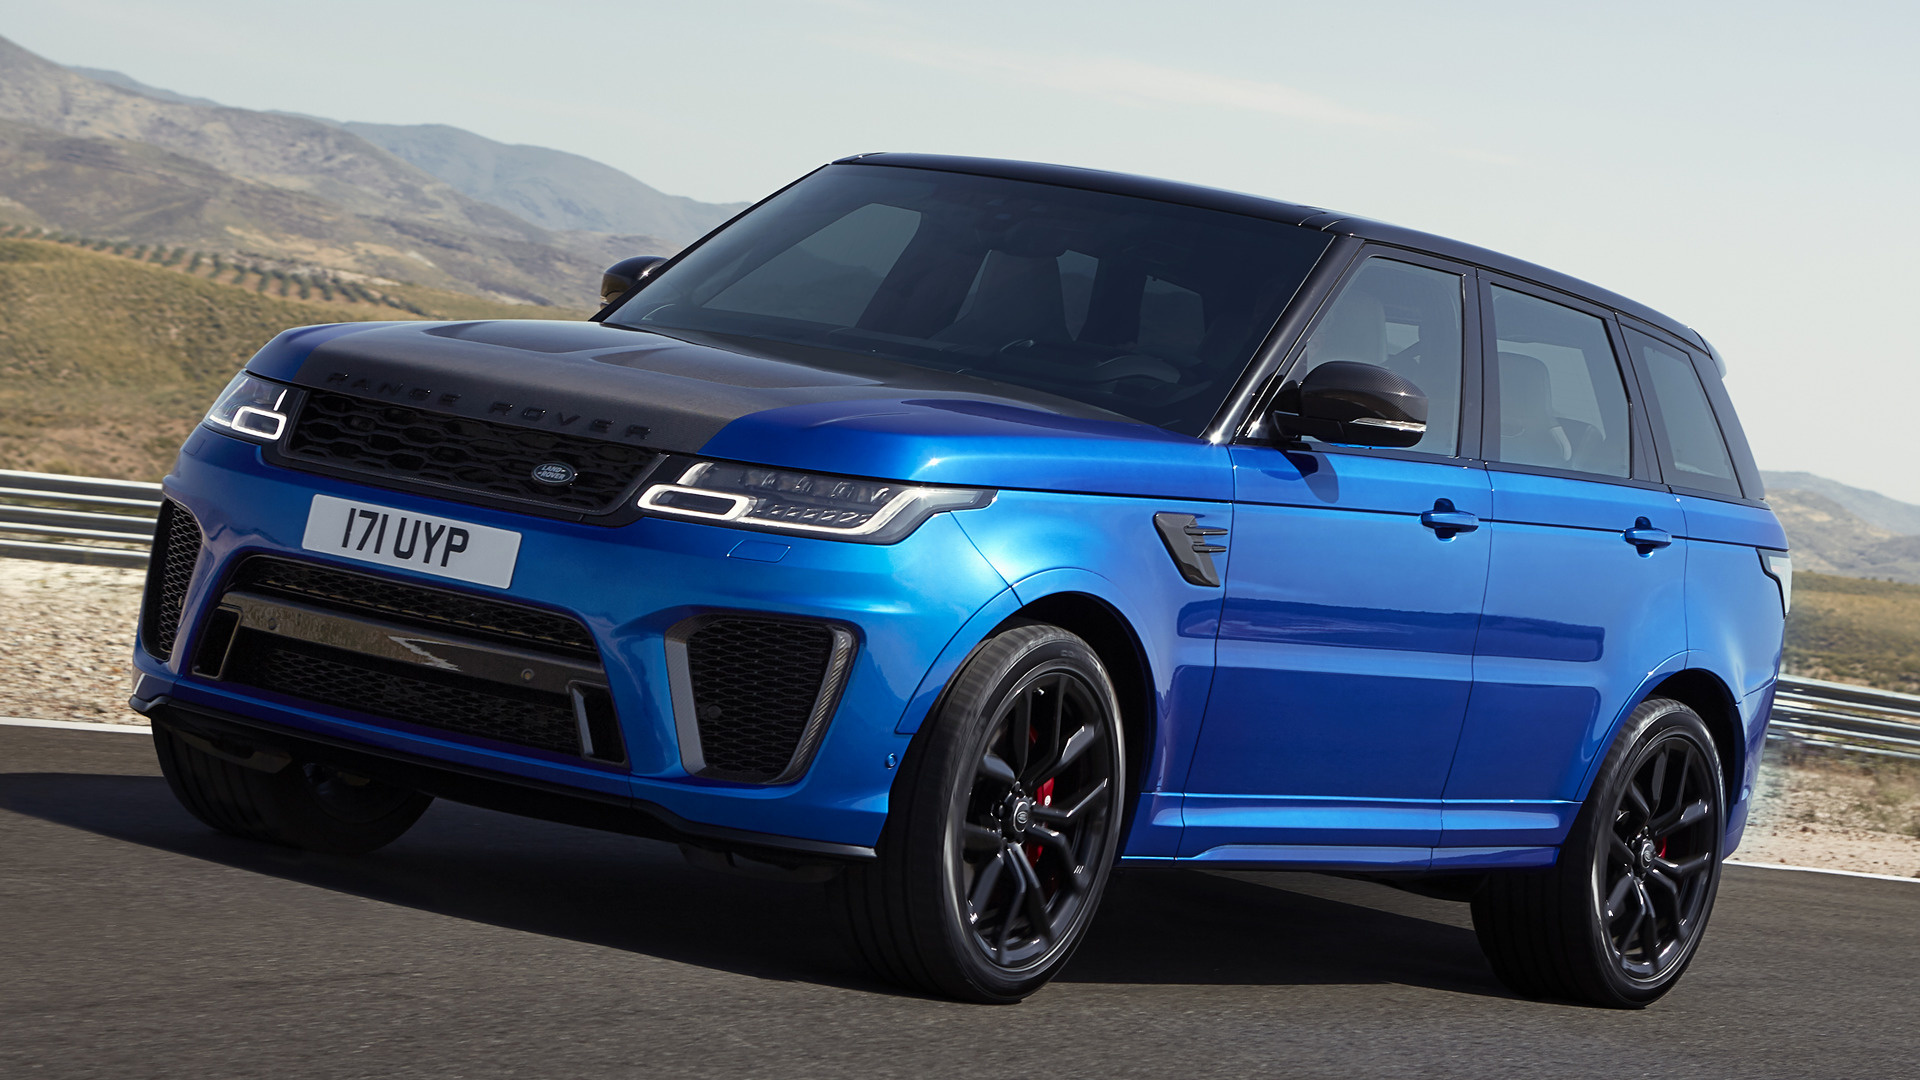 2017 Range Rover Sport SVR - Wallpapers and HD Images ...